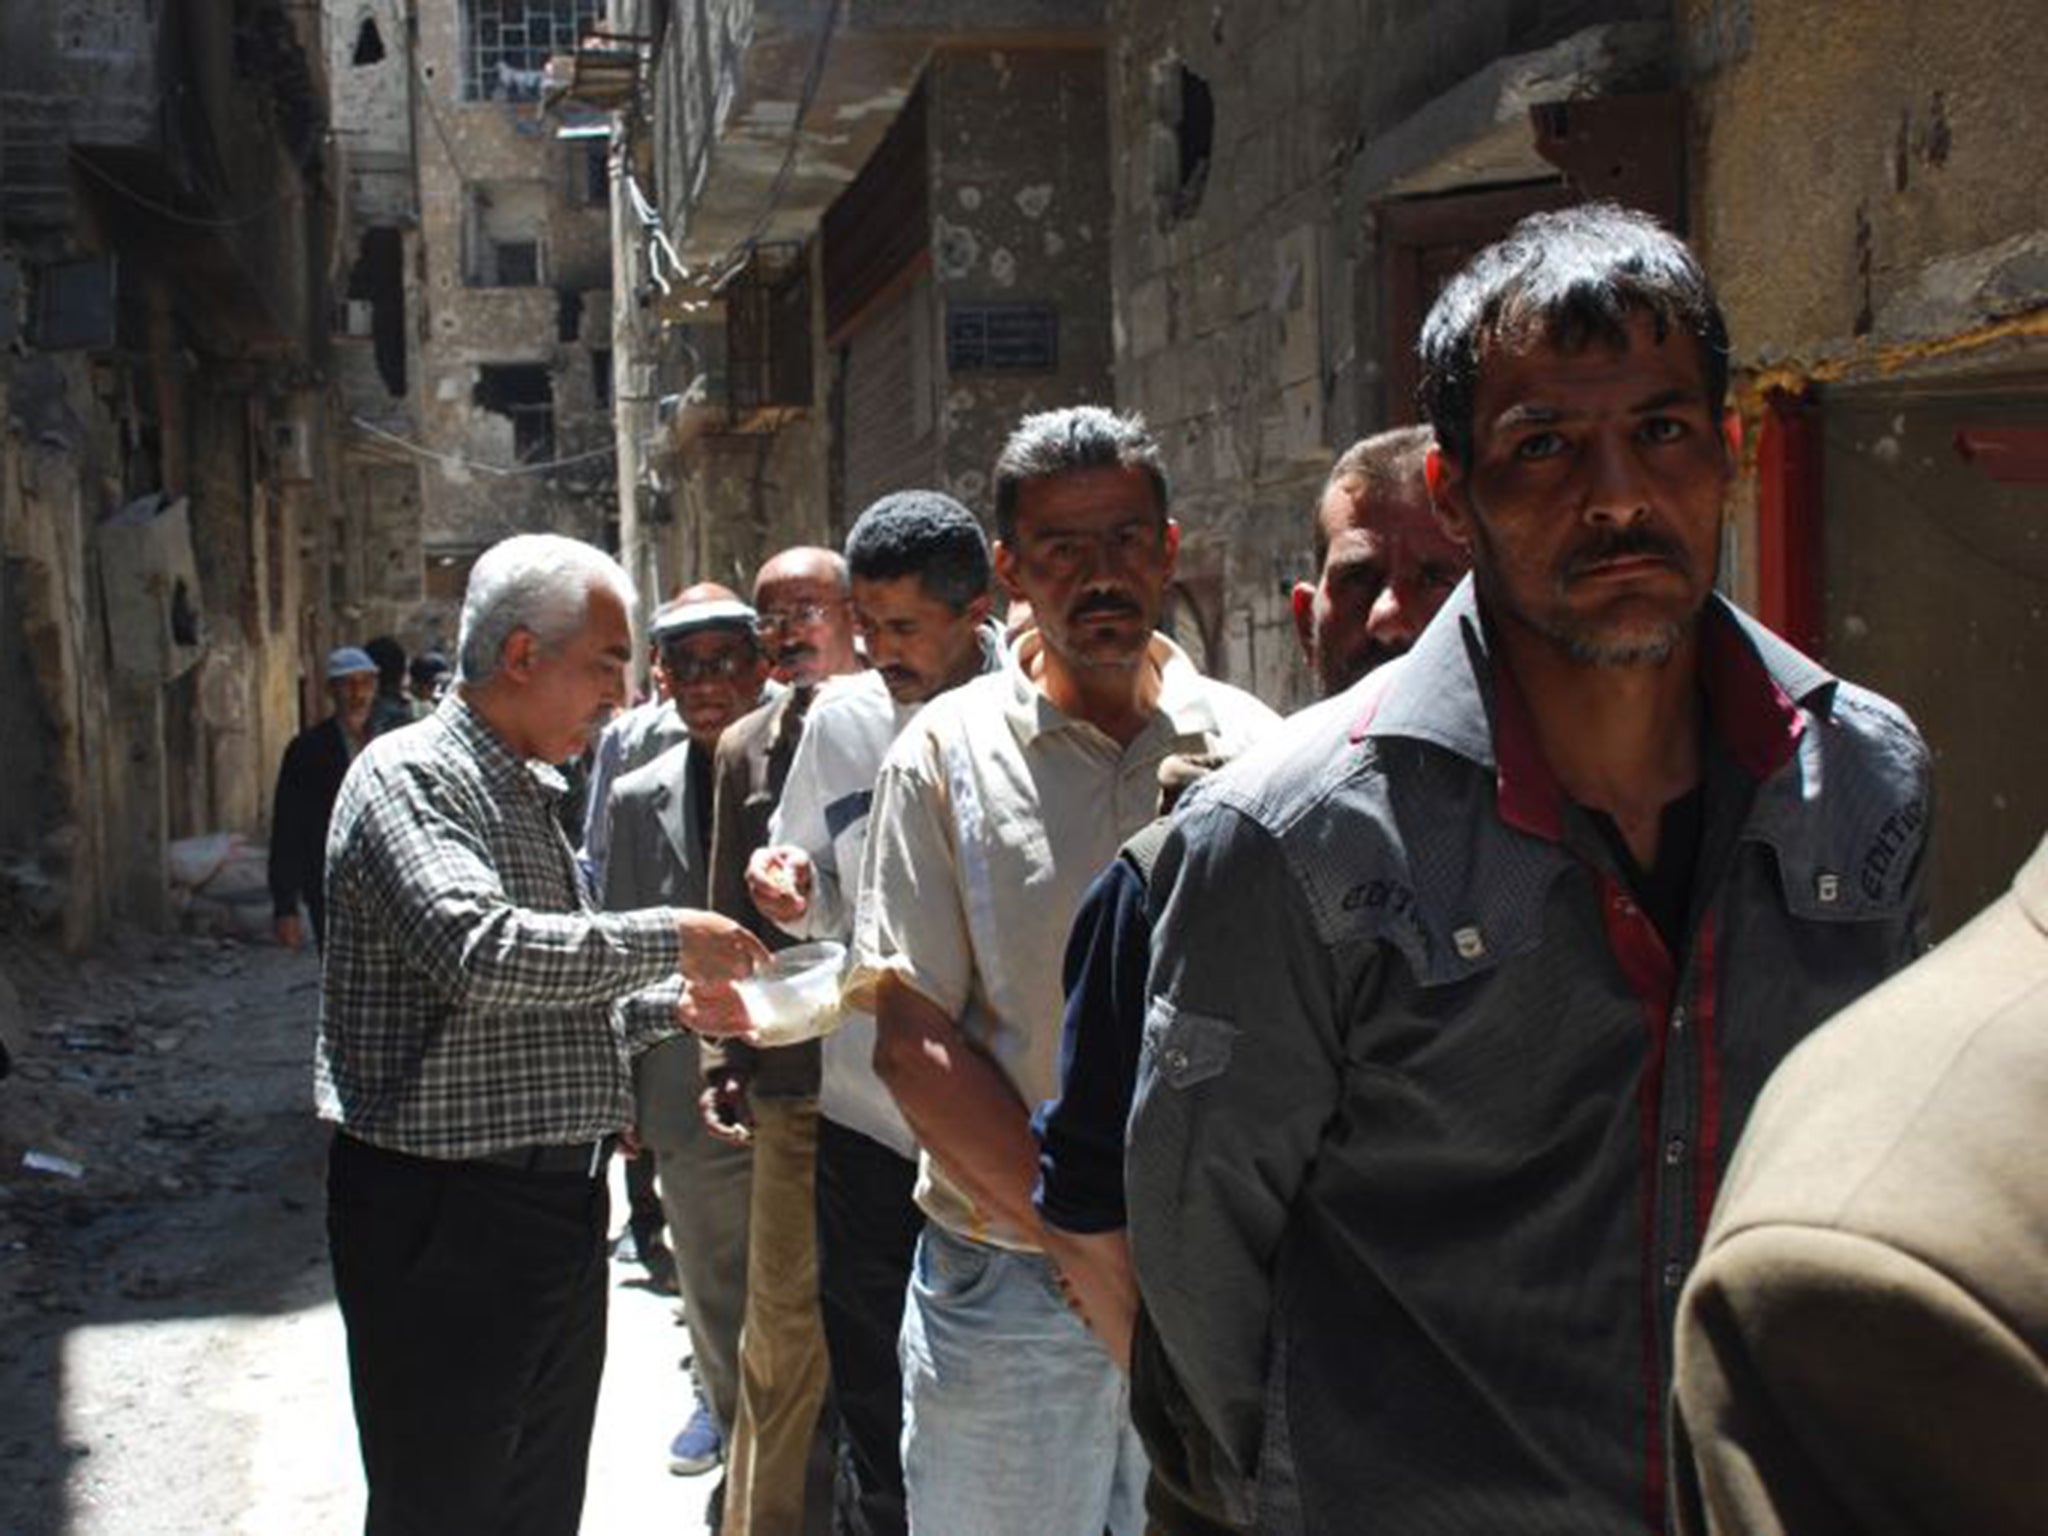 A large part of the Yarmouk Palestinian refugee camp has been overrun by IS